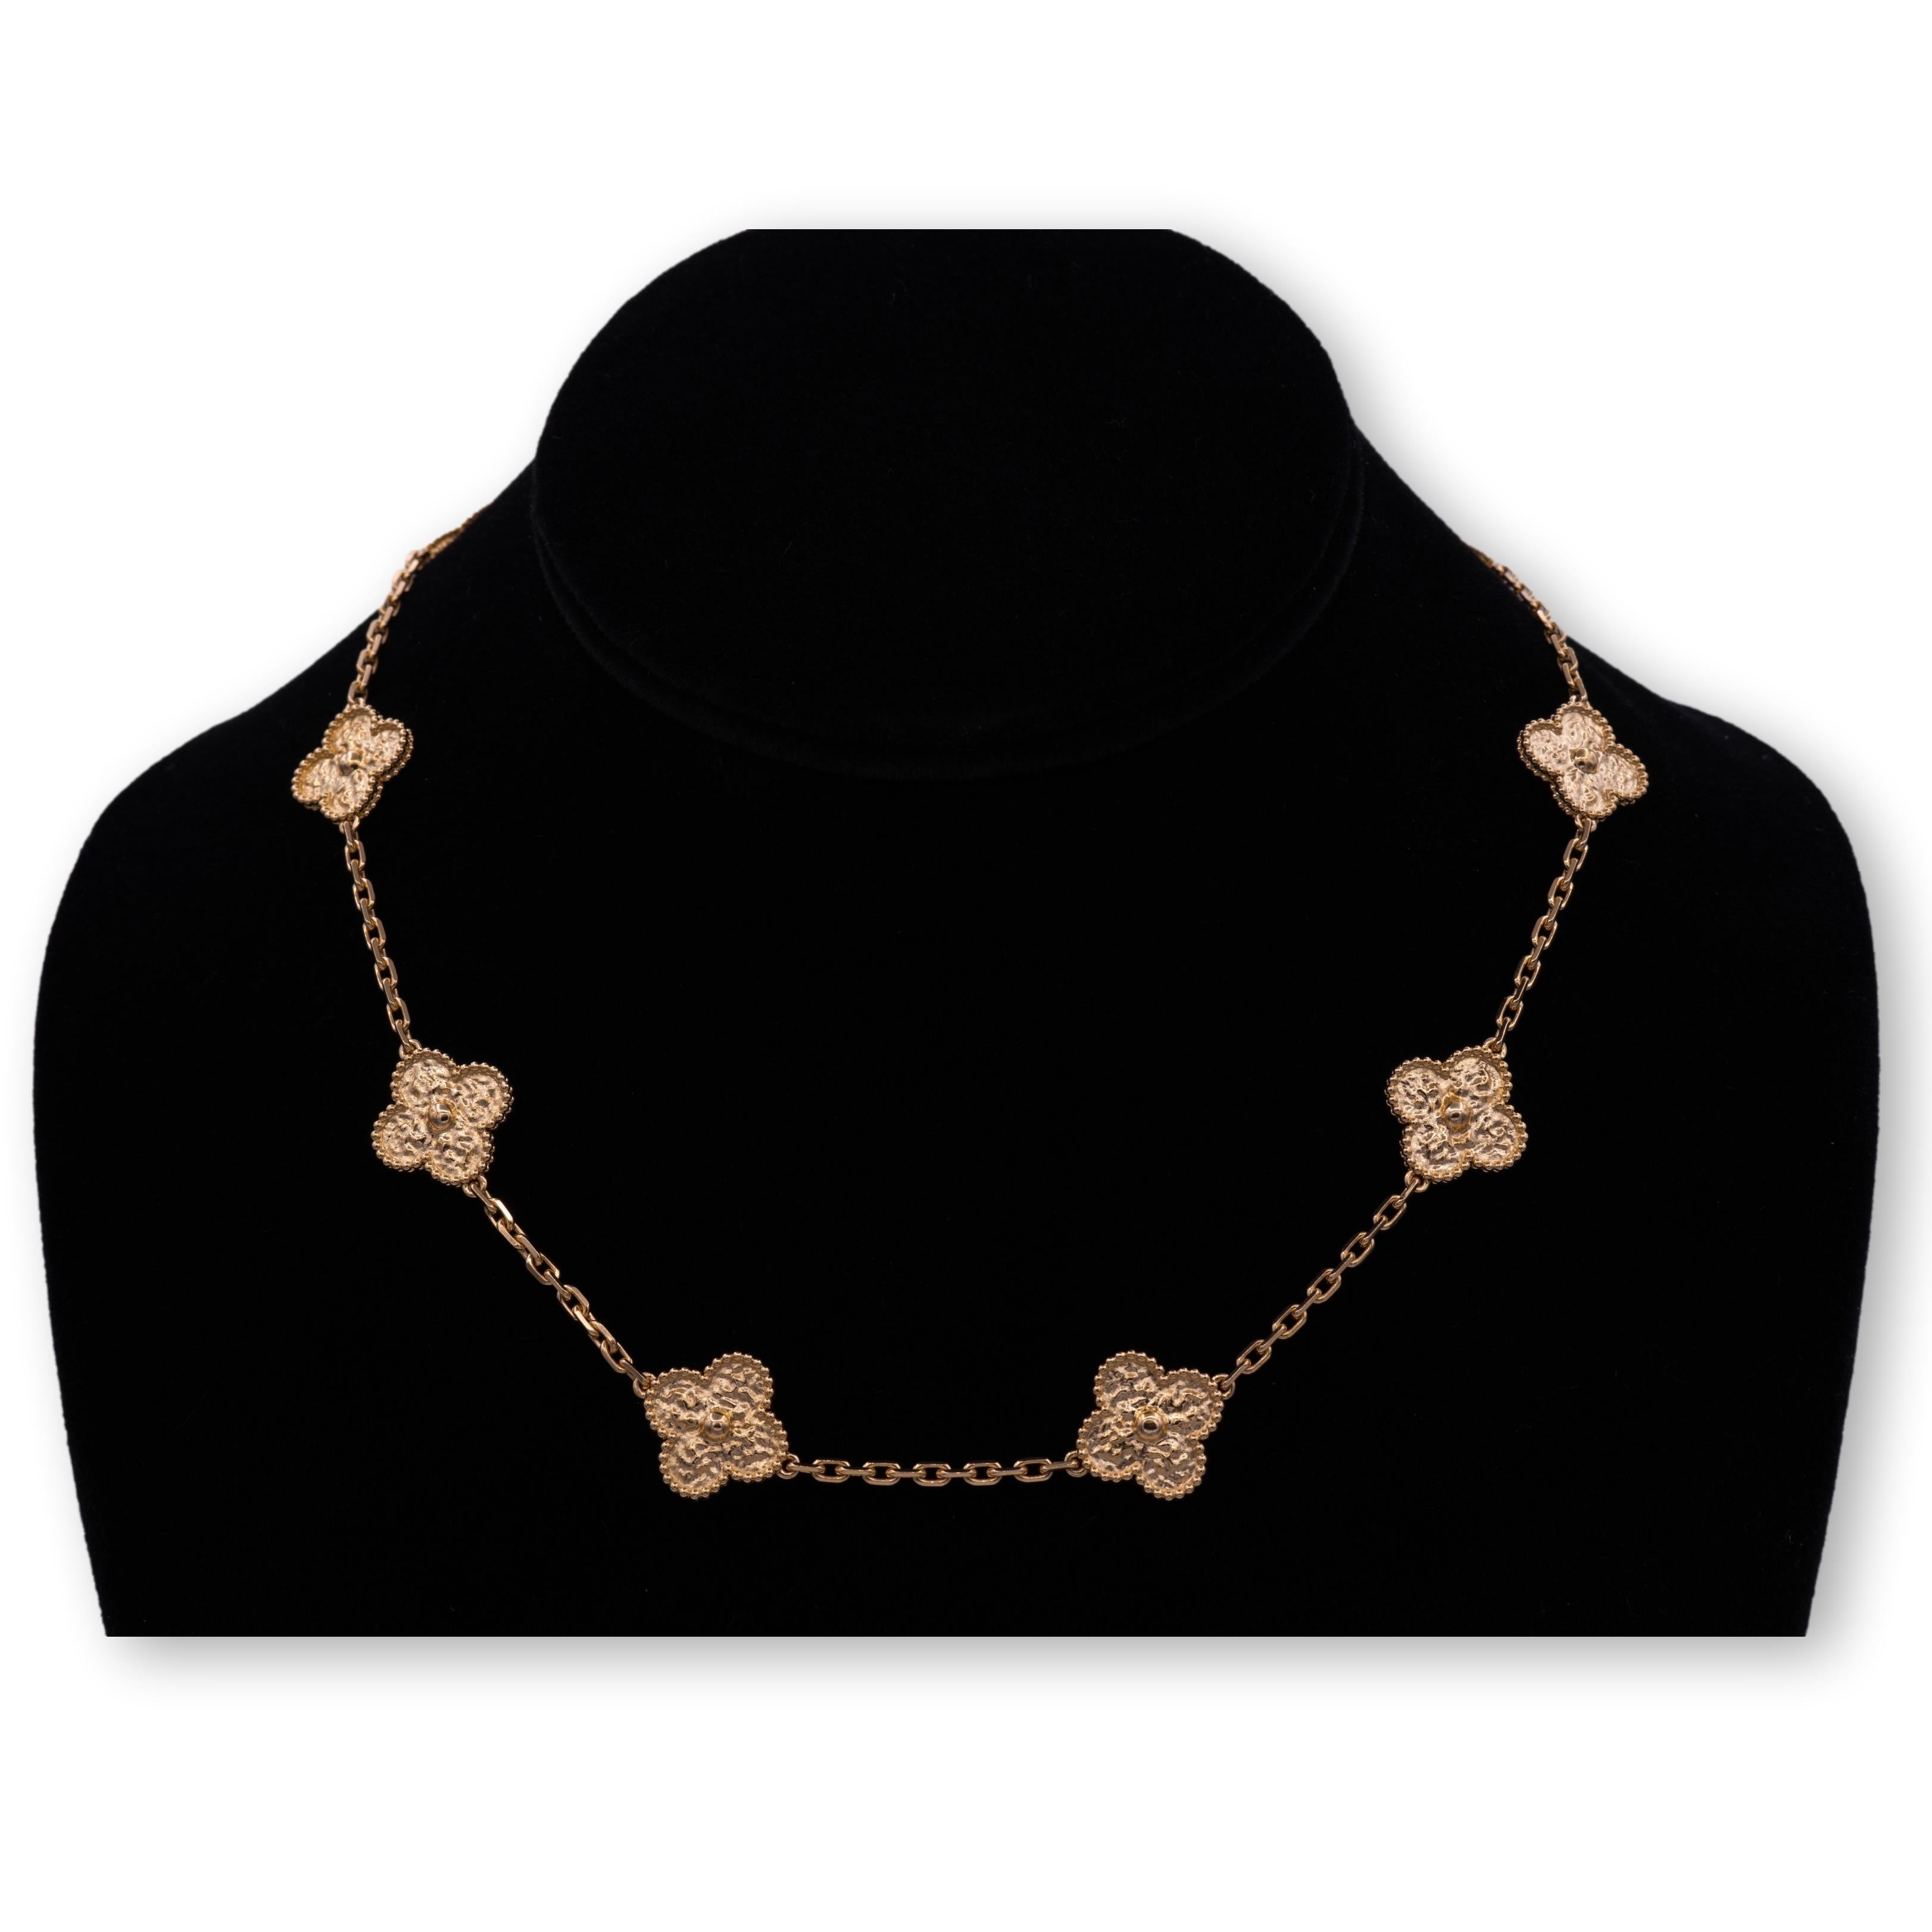 Van Cleef & Arpels necklace from the Vintage Alhambra collection finely crafted in 18 Karat Rose Gold featuring 10 signature clover motifs with a hammered gold finish on a link chain with large lobster claw closure. Each ornament measures 0.59” Wide